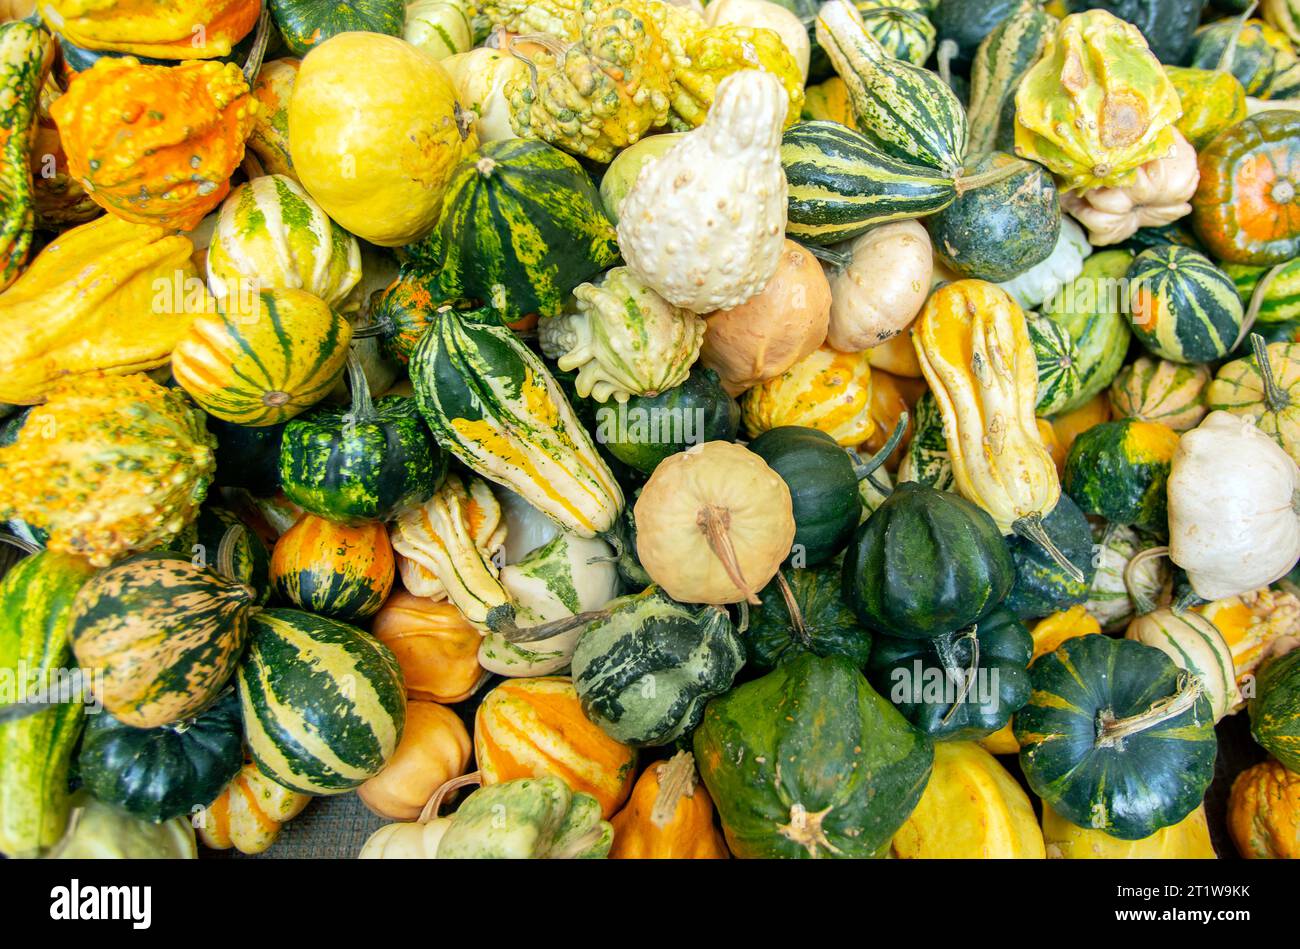 Italy Piedmont Turin Via Roma of the Floricola exhibition-market - ornamental pumpkins Credit: Realy Easy Star/Alamy Live News Stock Photo